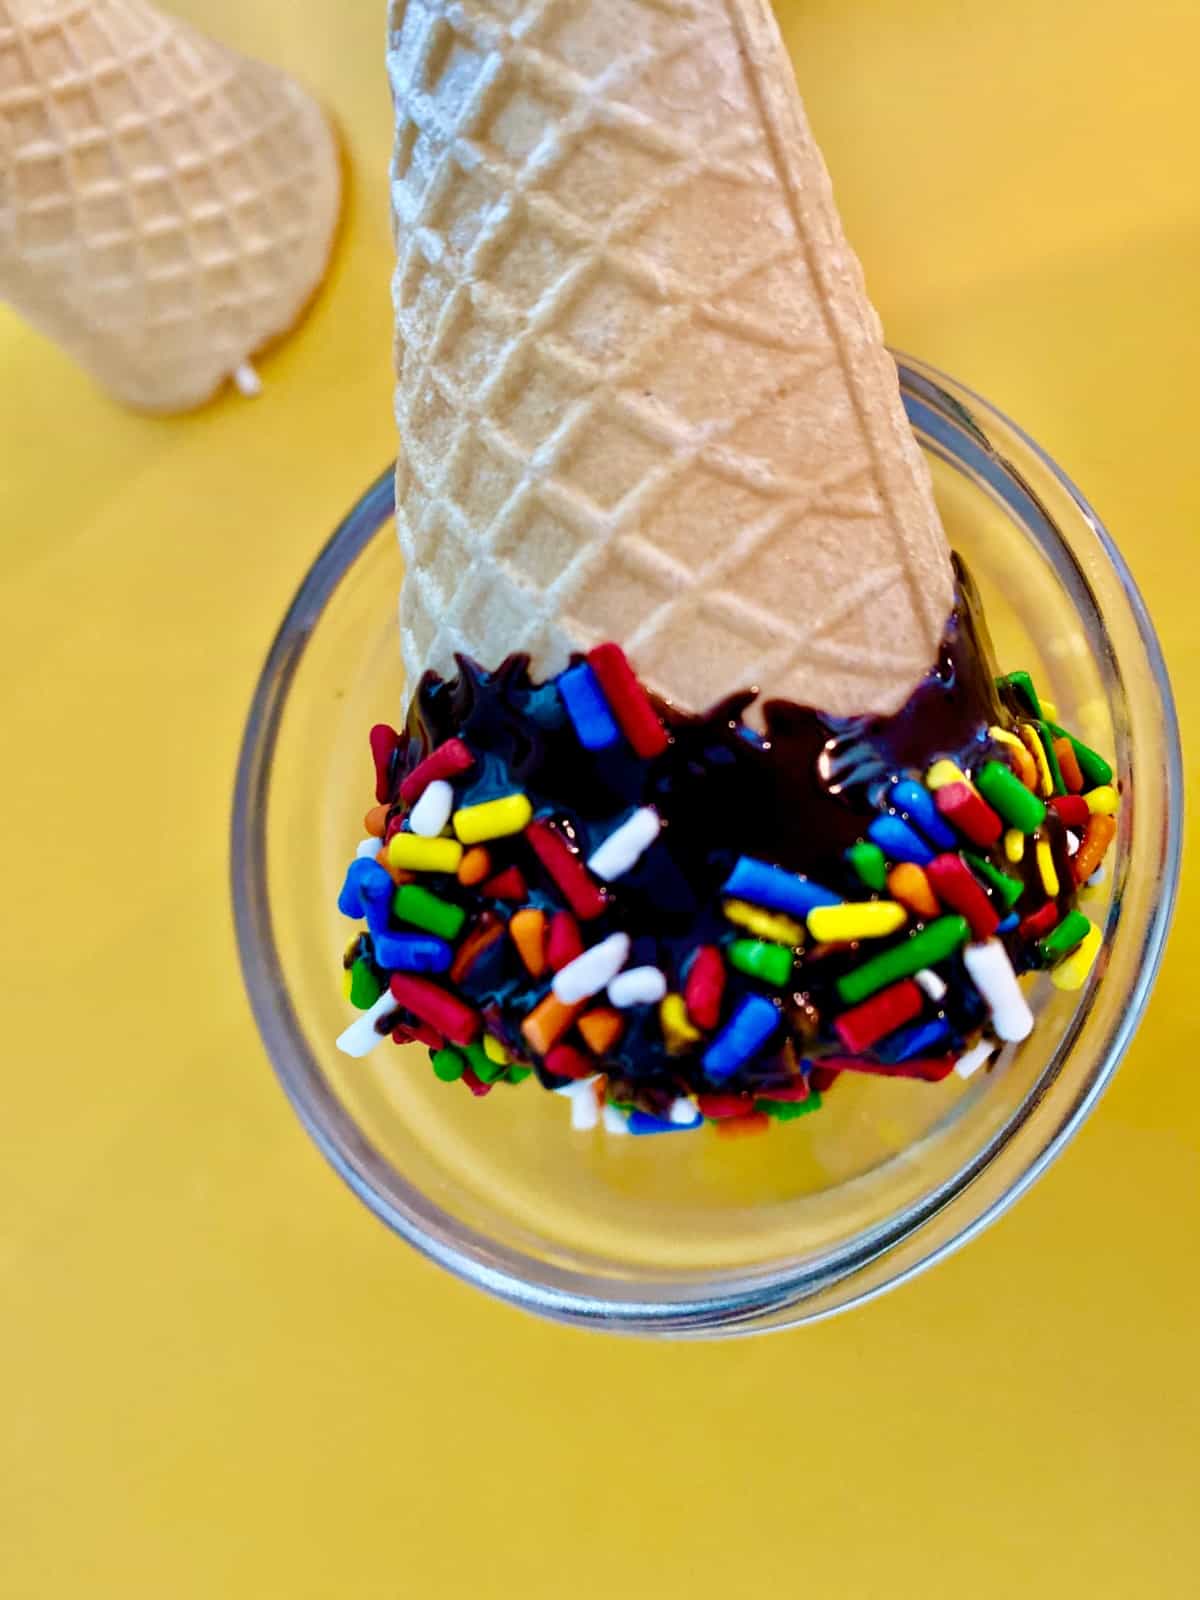 Ice cream cone with melted chocolate and sprinkles.